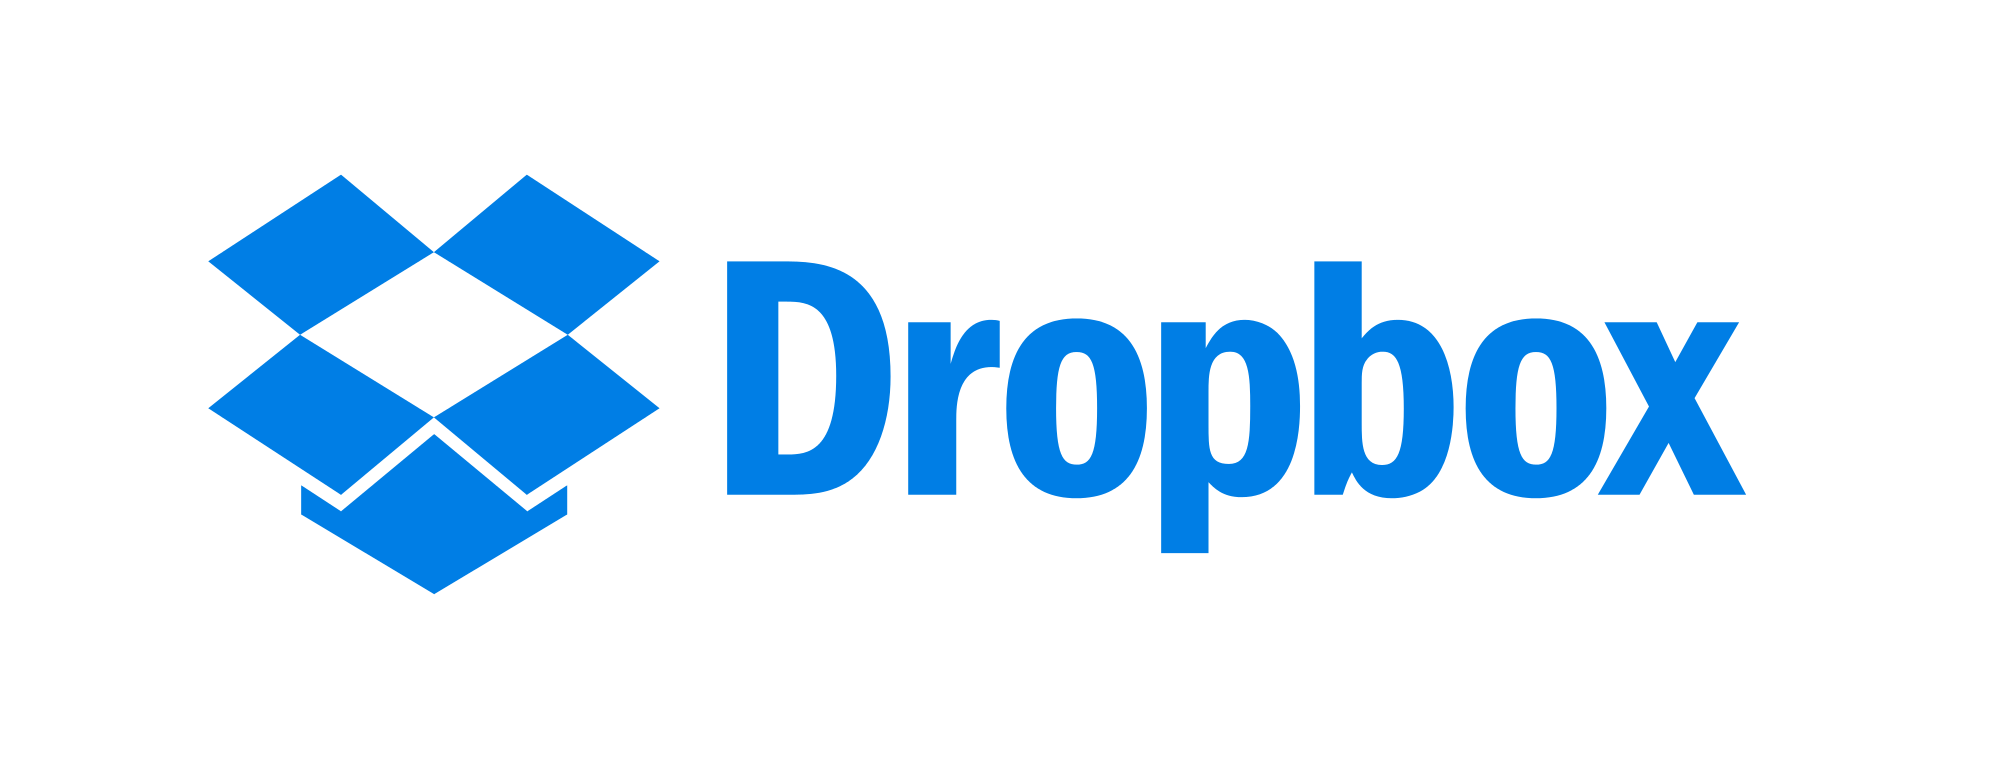 How to run Dropbox as a service on a Server Operating System